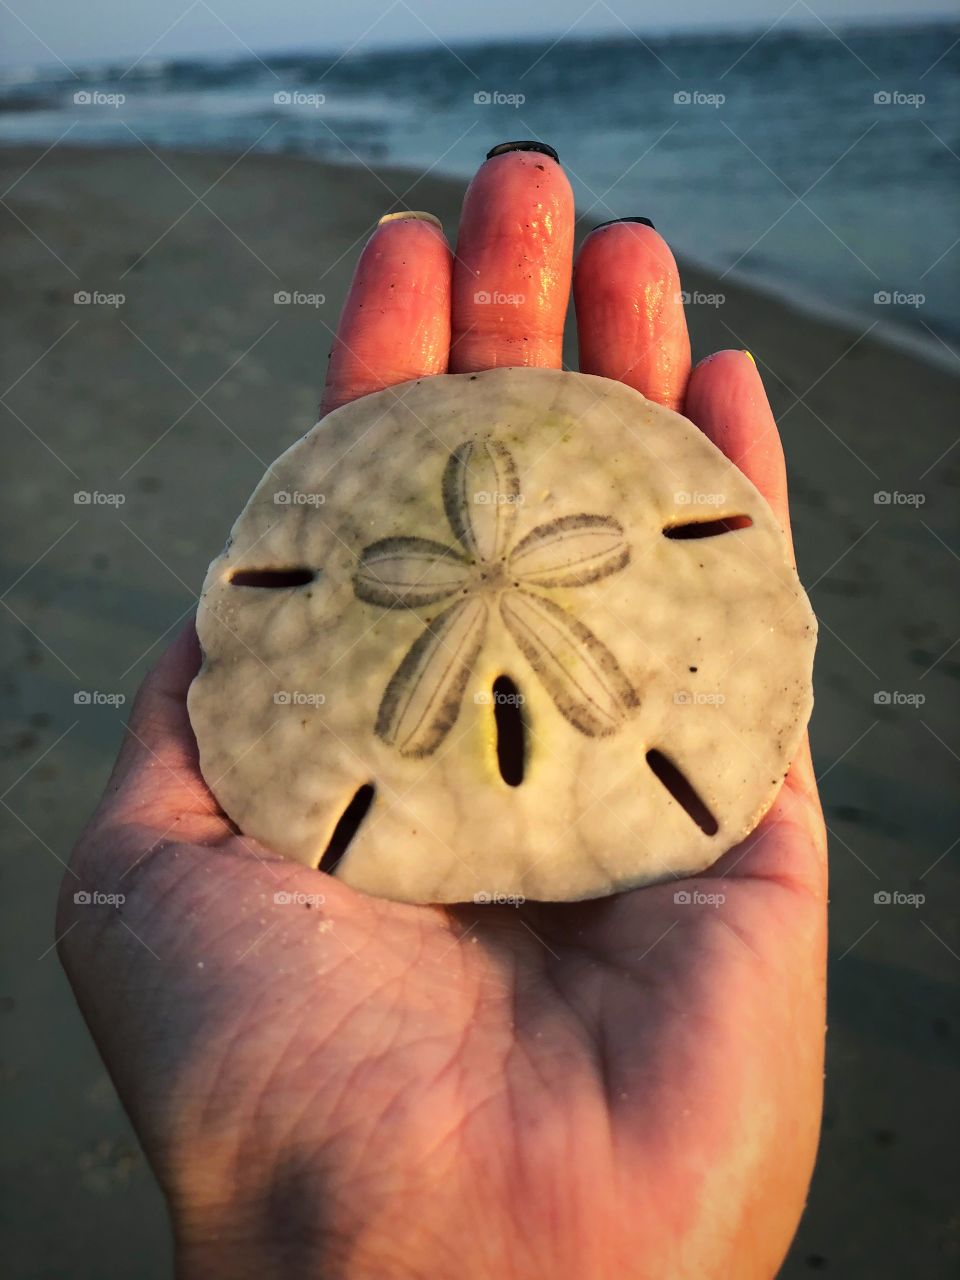 Sand dollar find!!! Beach and summer days are the best days! Lucky find 